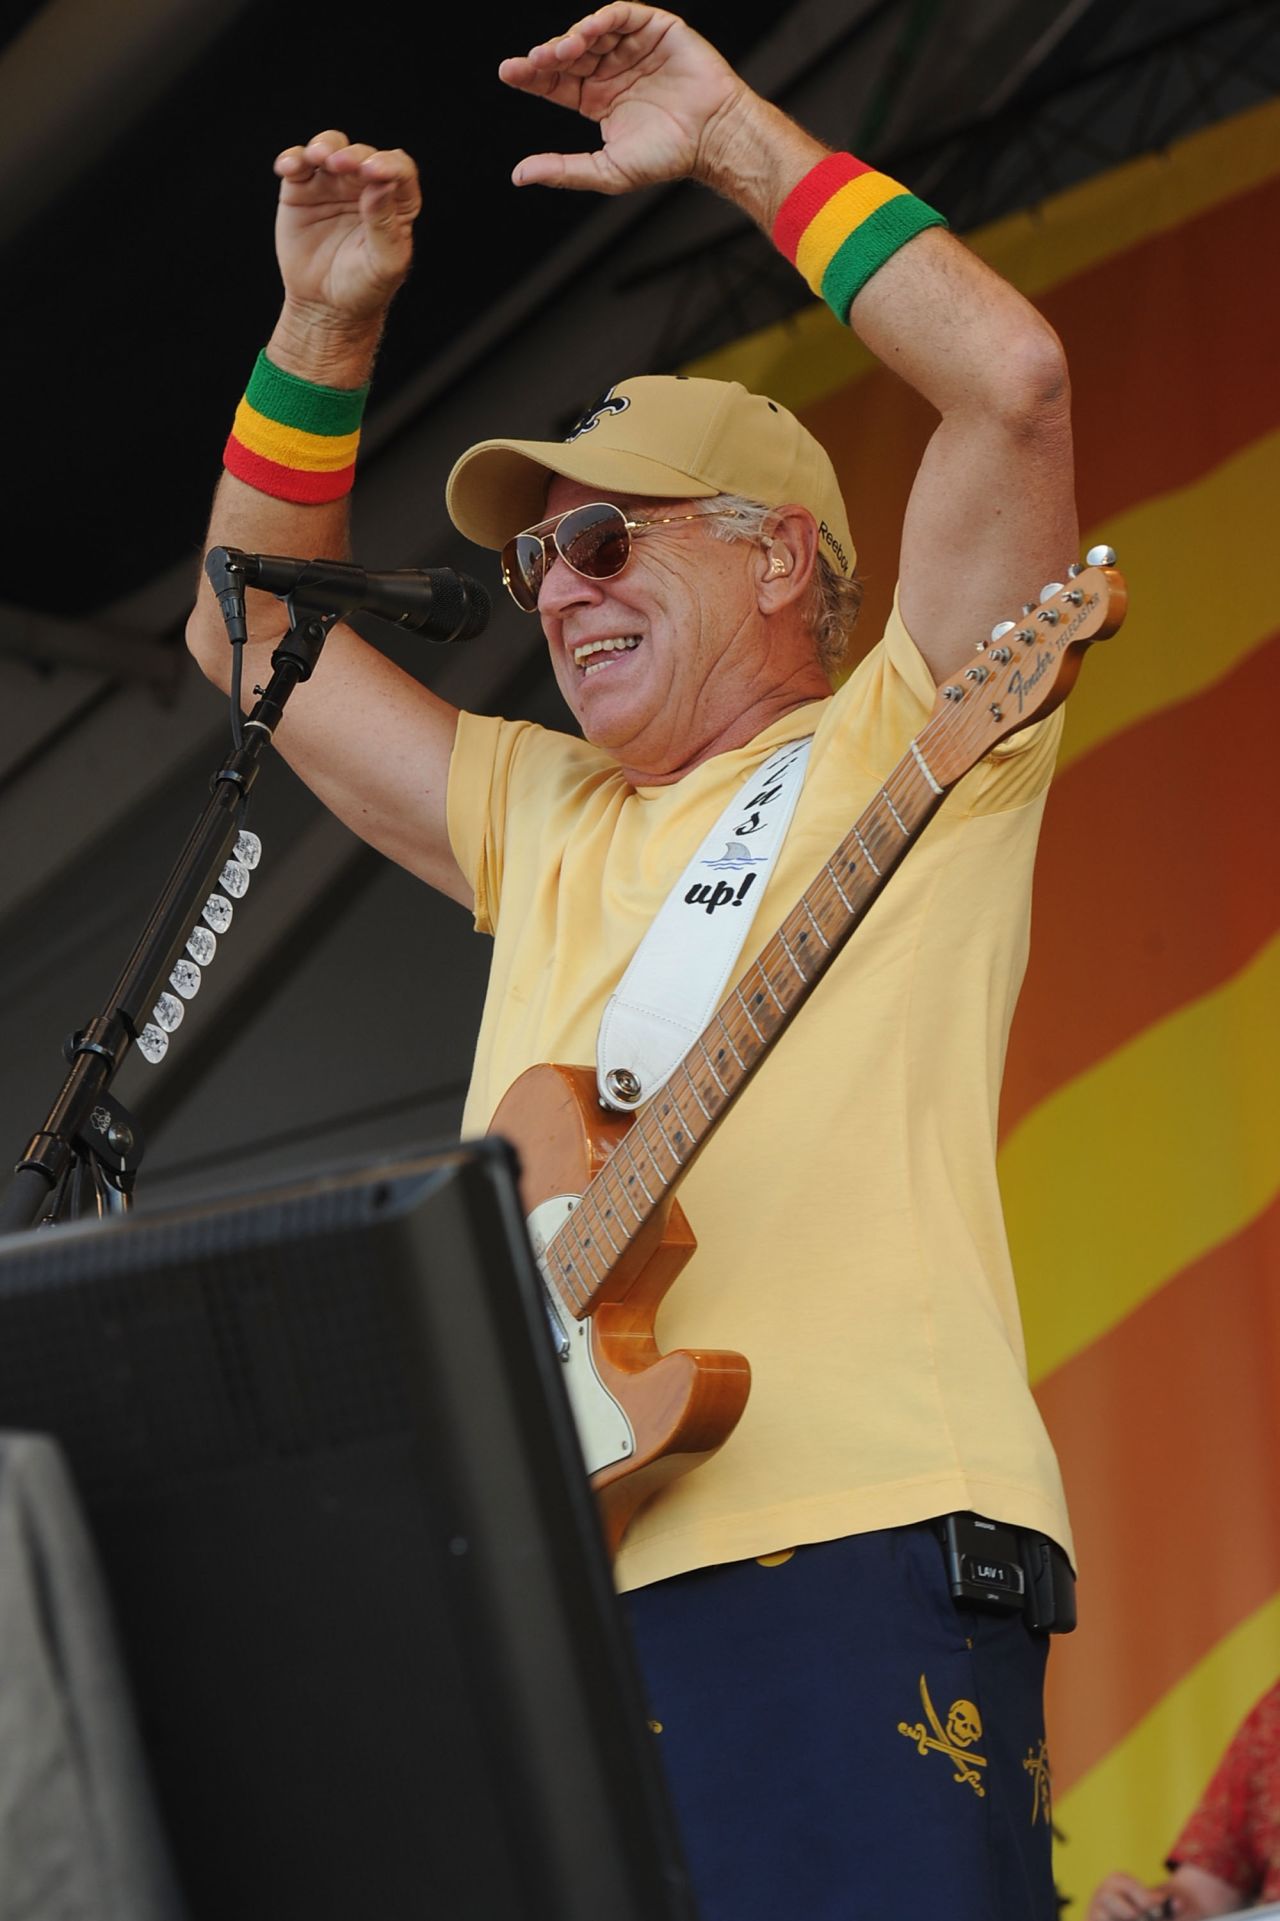 An over-40 victim of fate: Singer Jimmy Buffett qualifies through a technicality, though he's still 200 years too late.